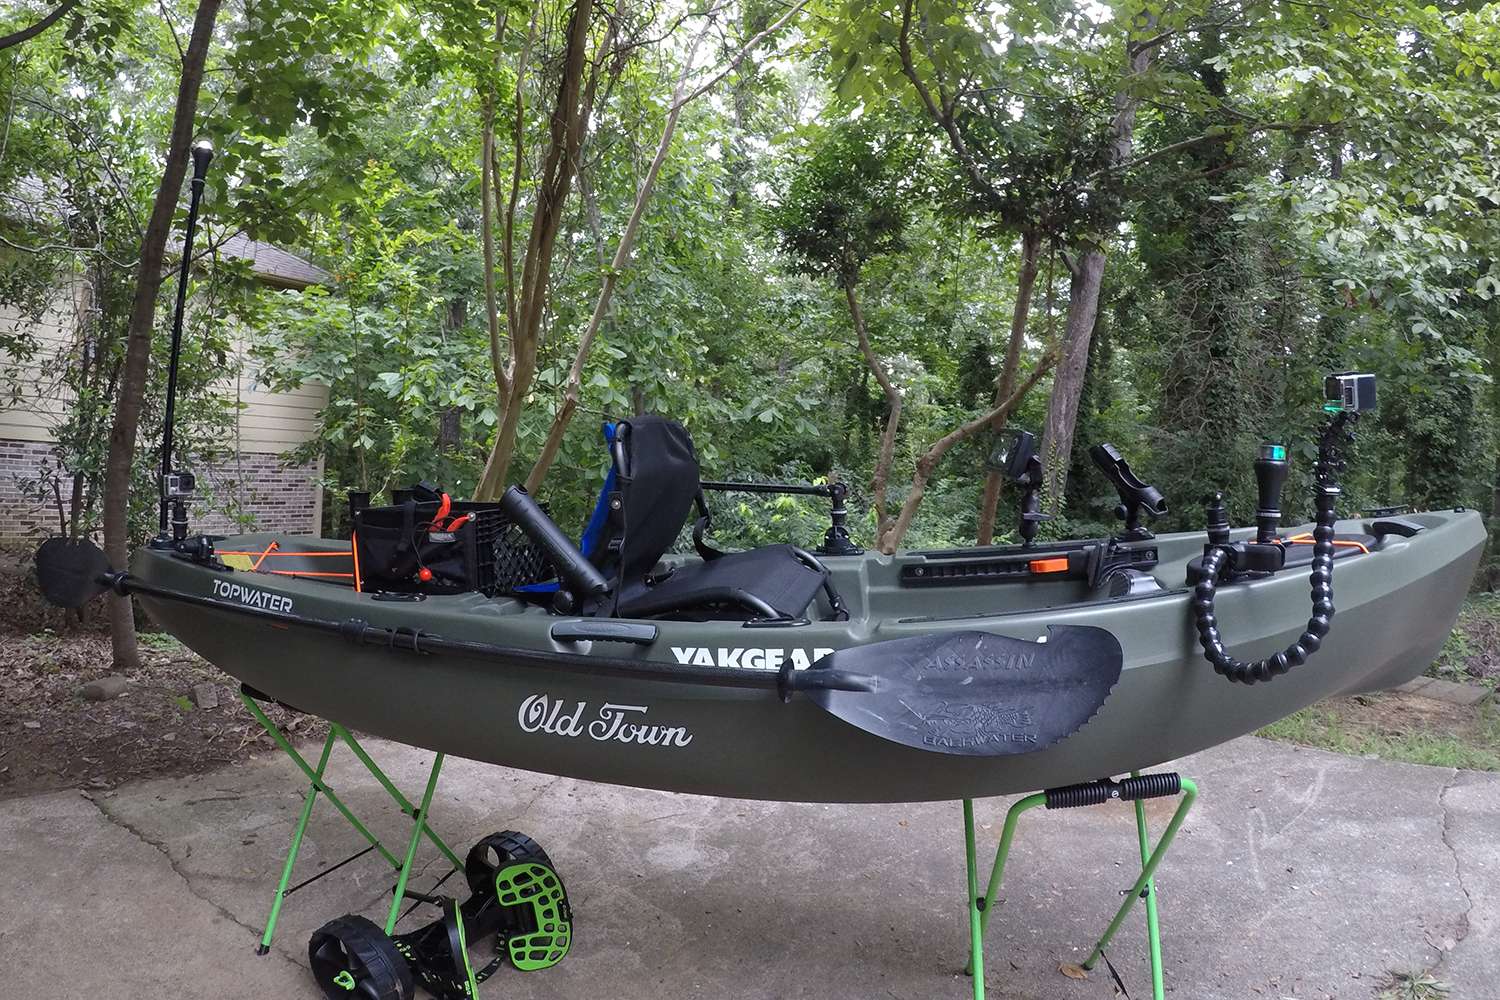 Here's another look at the decked out Old Town Topwater 106 rigged with YakGear.